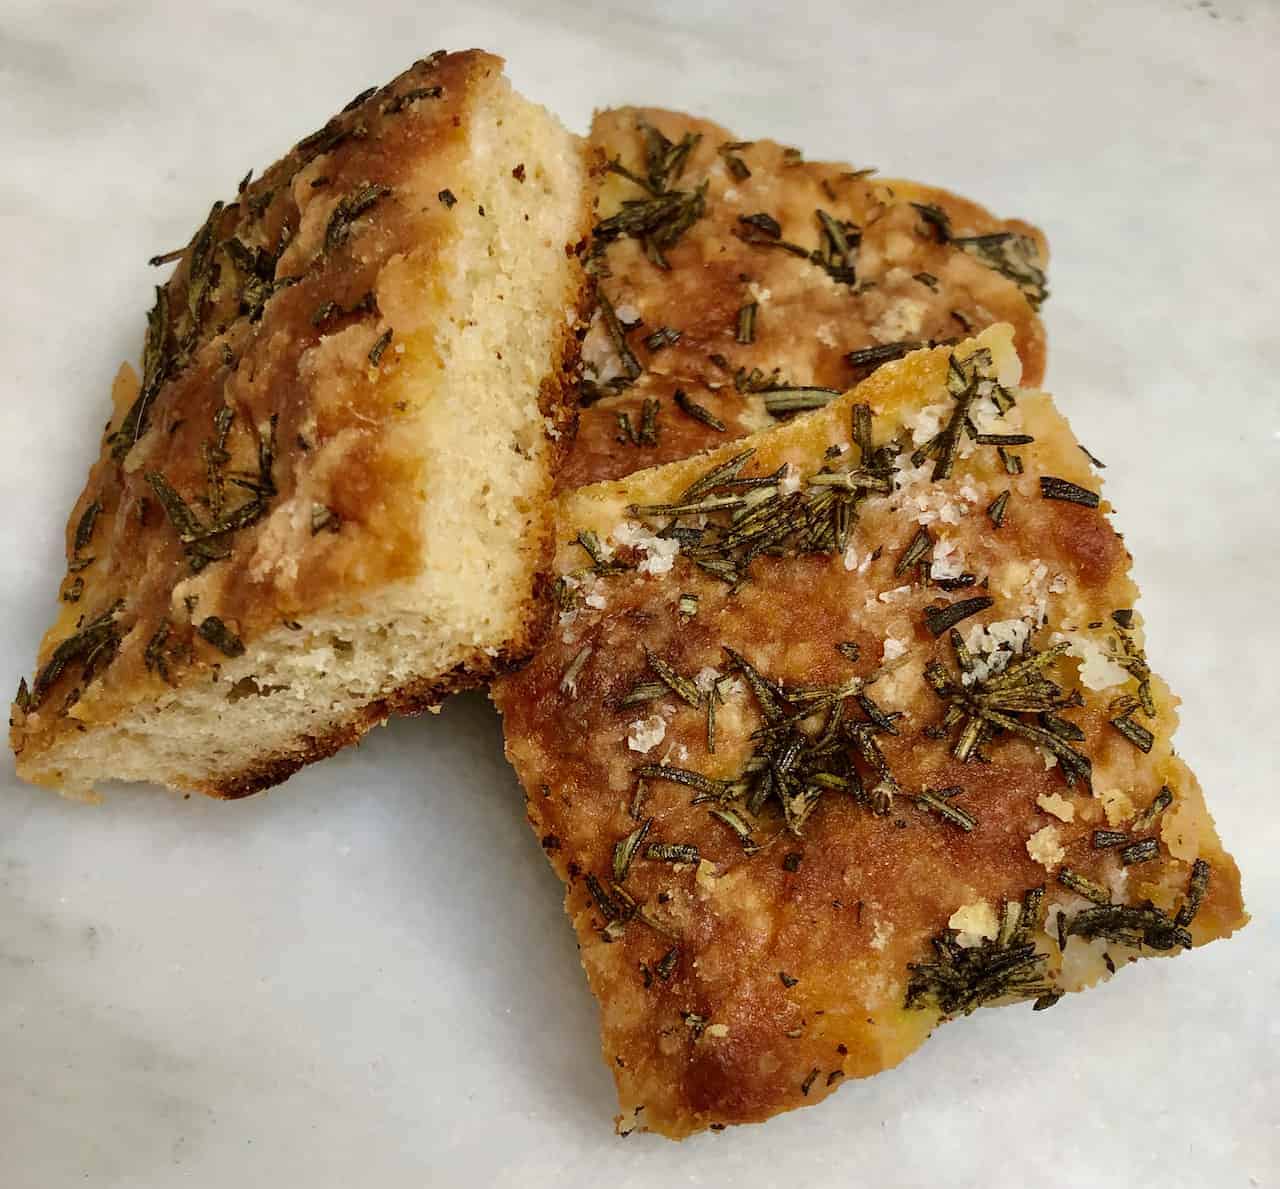 Joanne Chang’s Rosemary and Olive Oil Focaccia from Flour Bakery, Boston.